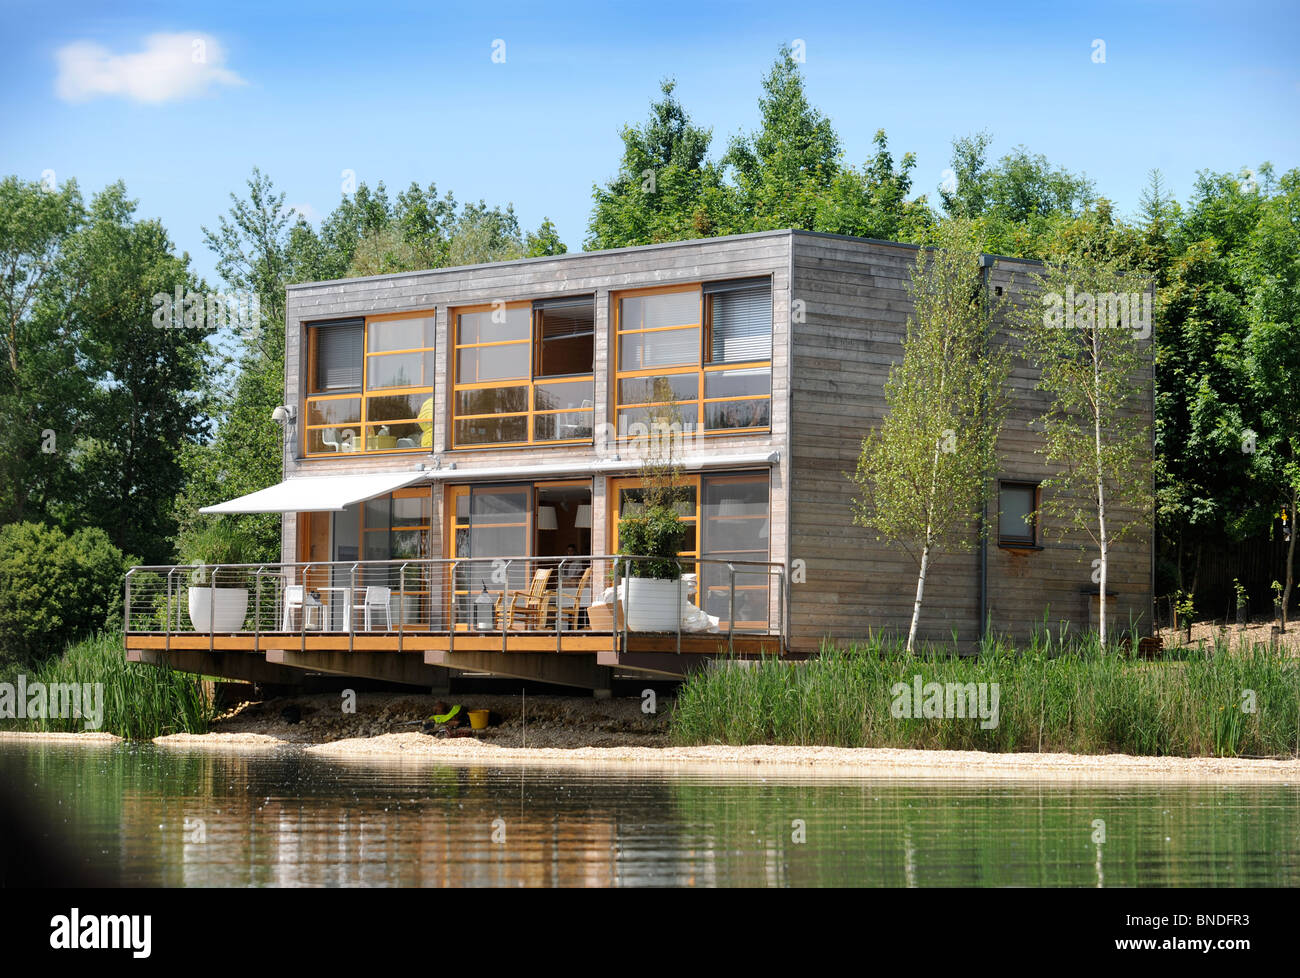 The 'Second home' development The Lakes By Yoo near Cirencester, Gloucestershire UK Stock Photo